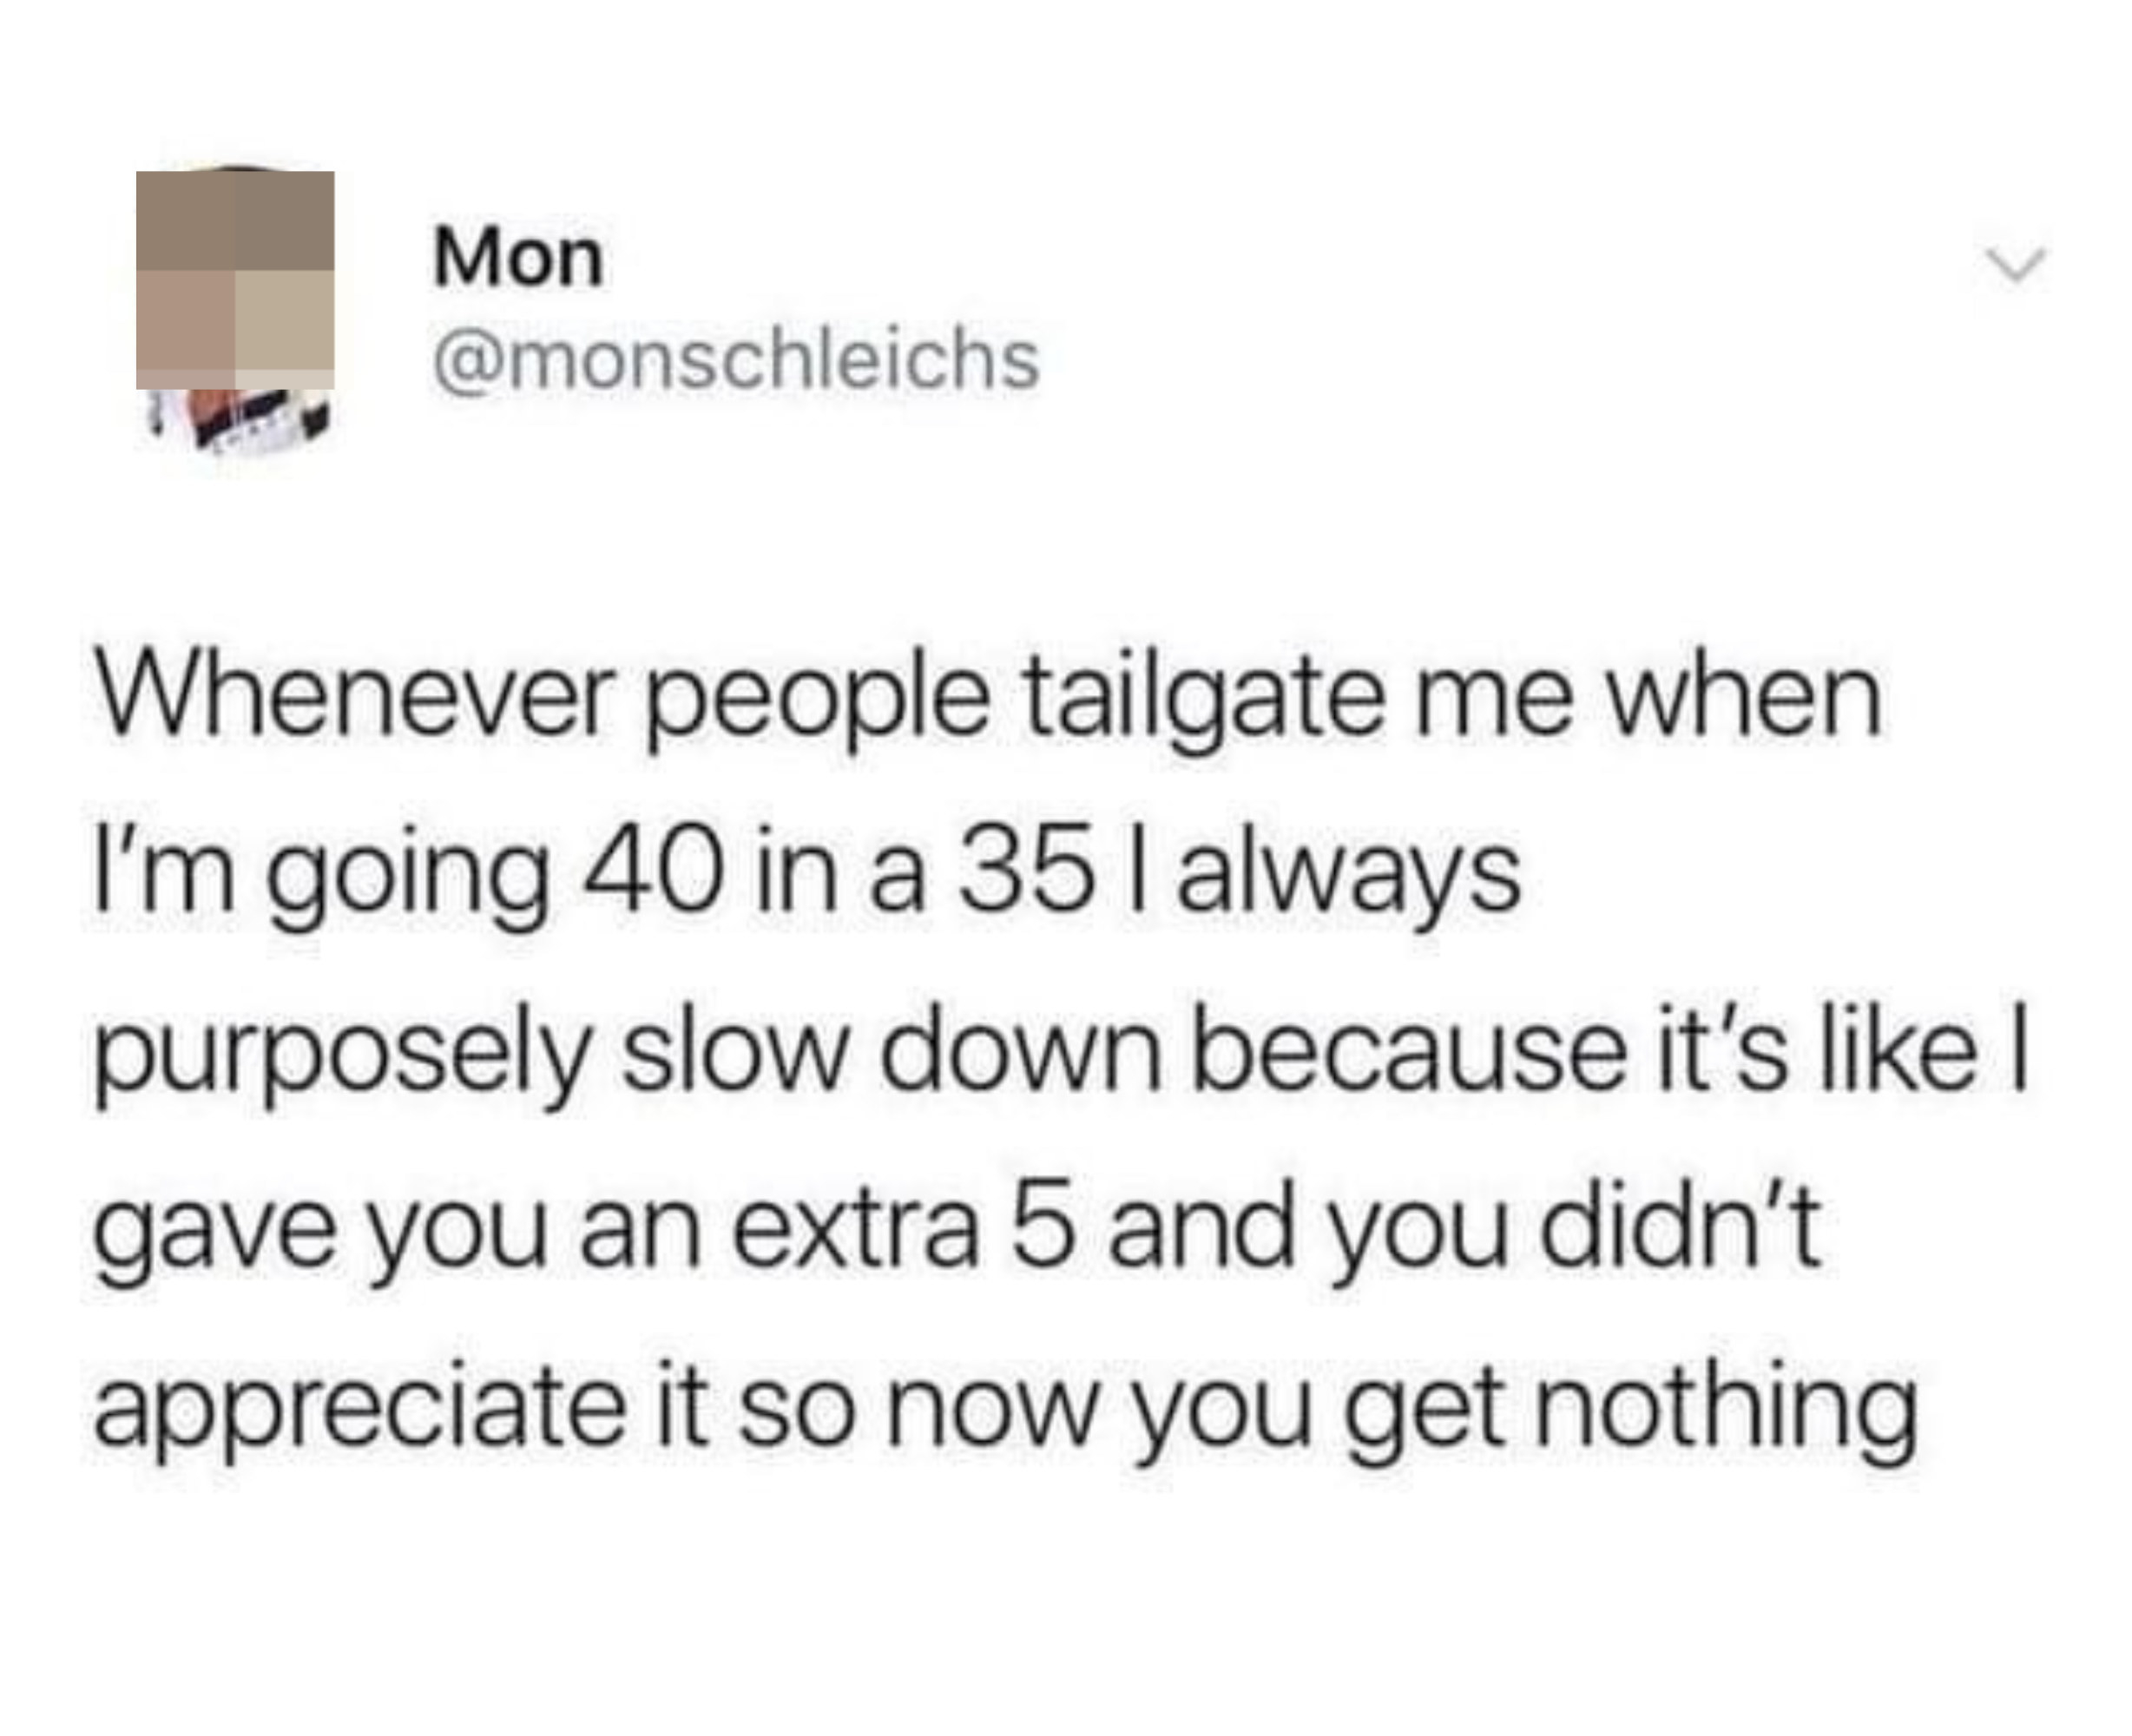 A tweet about purposely slowing down when someone tailgates